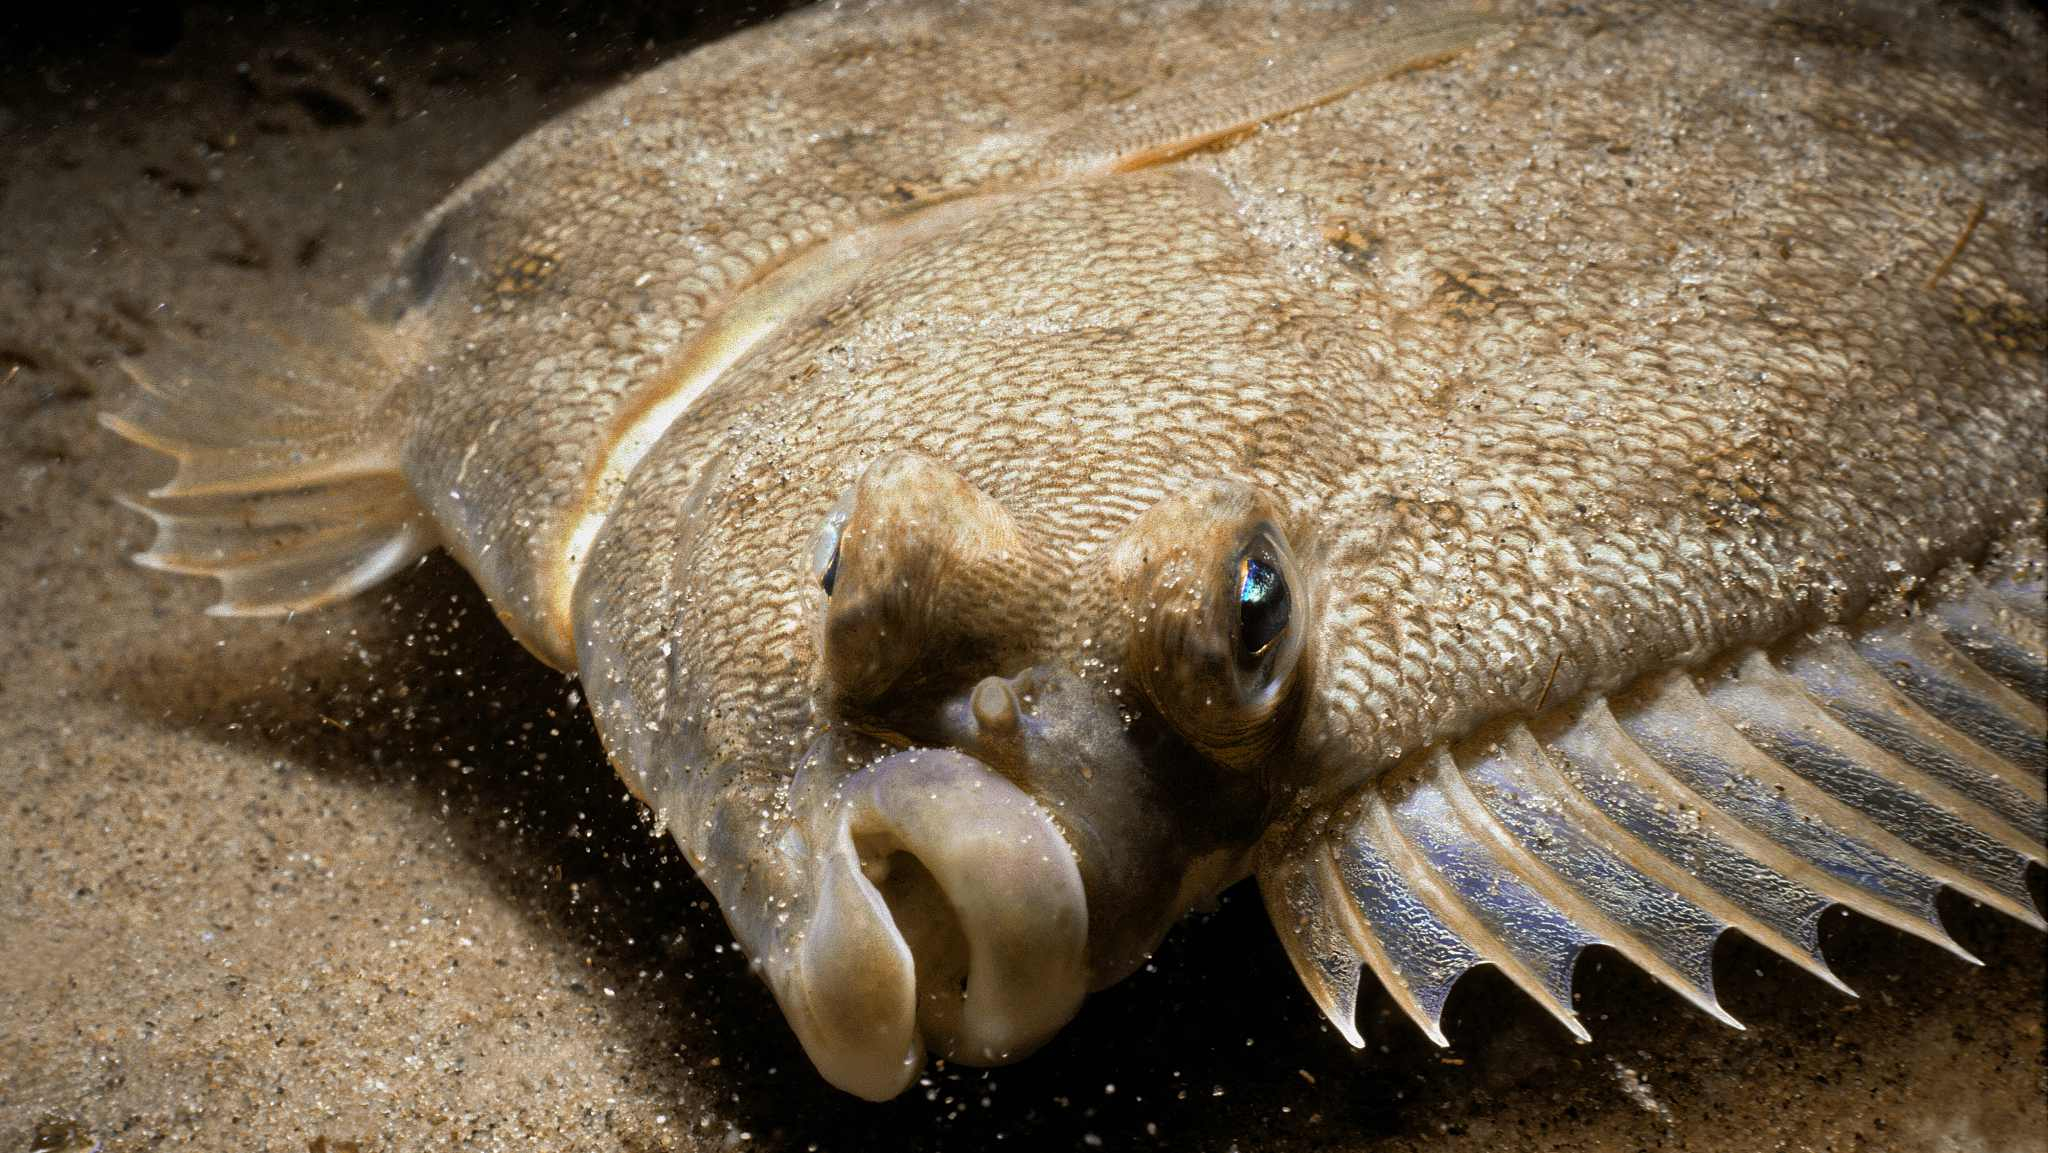 The walking fish: Flatfish use their fins to move around the